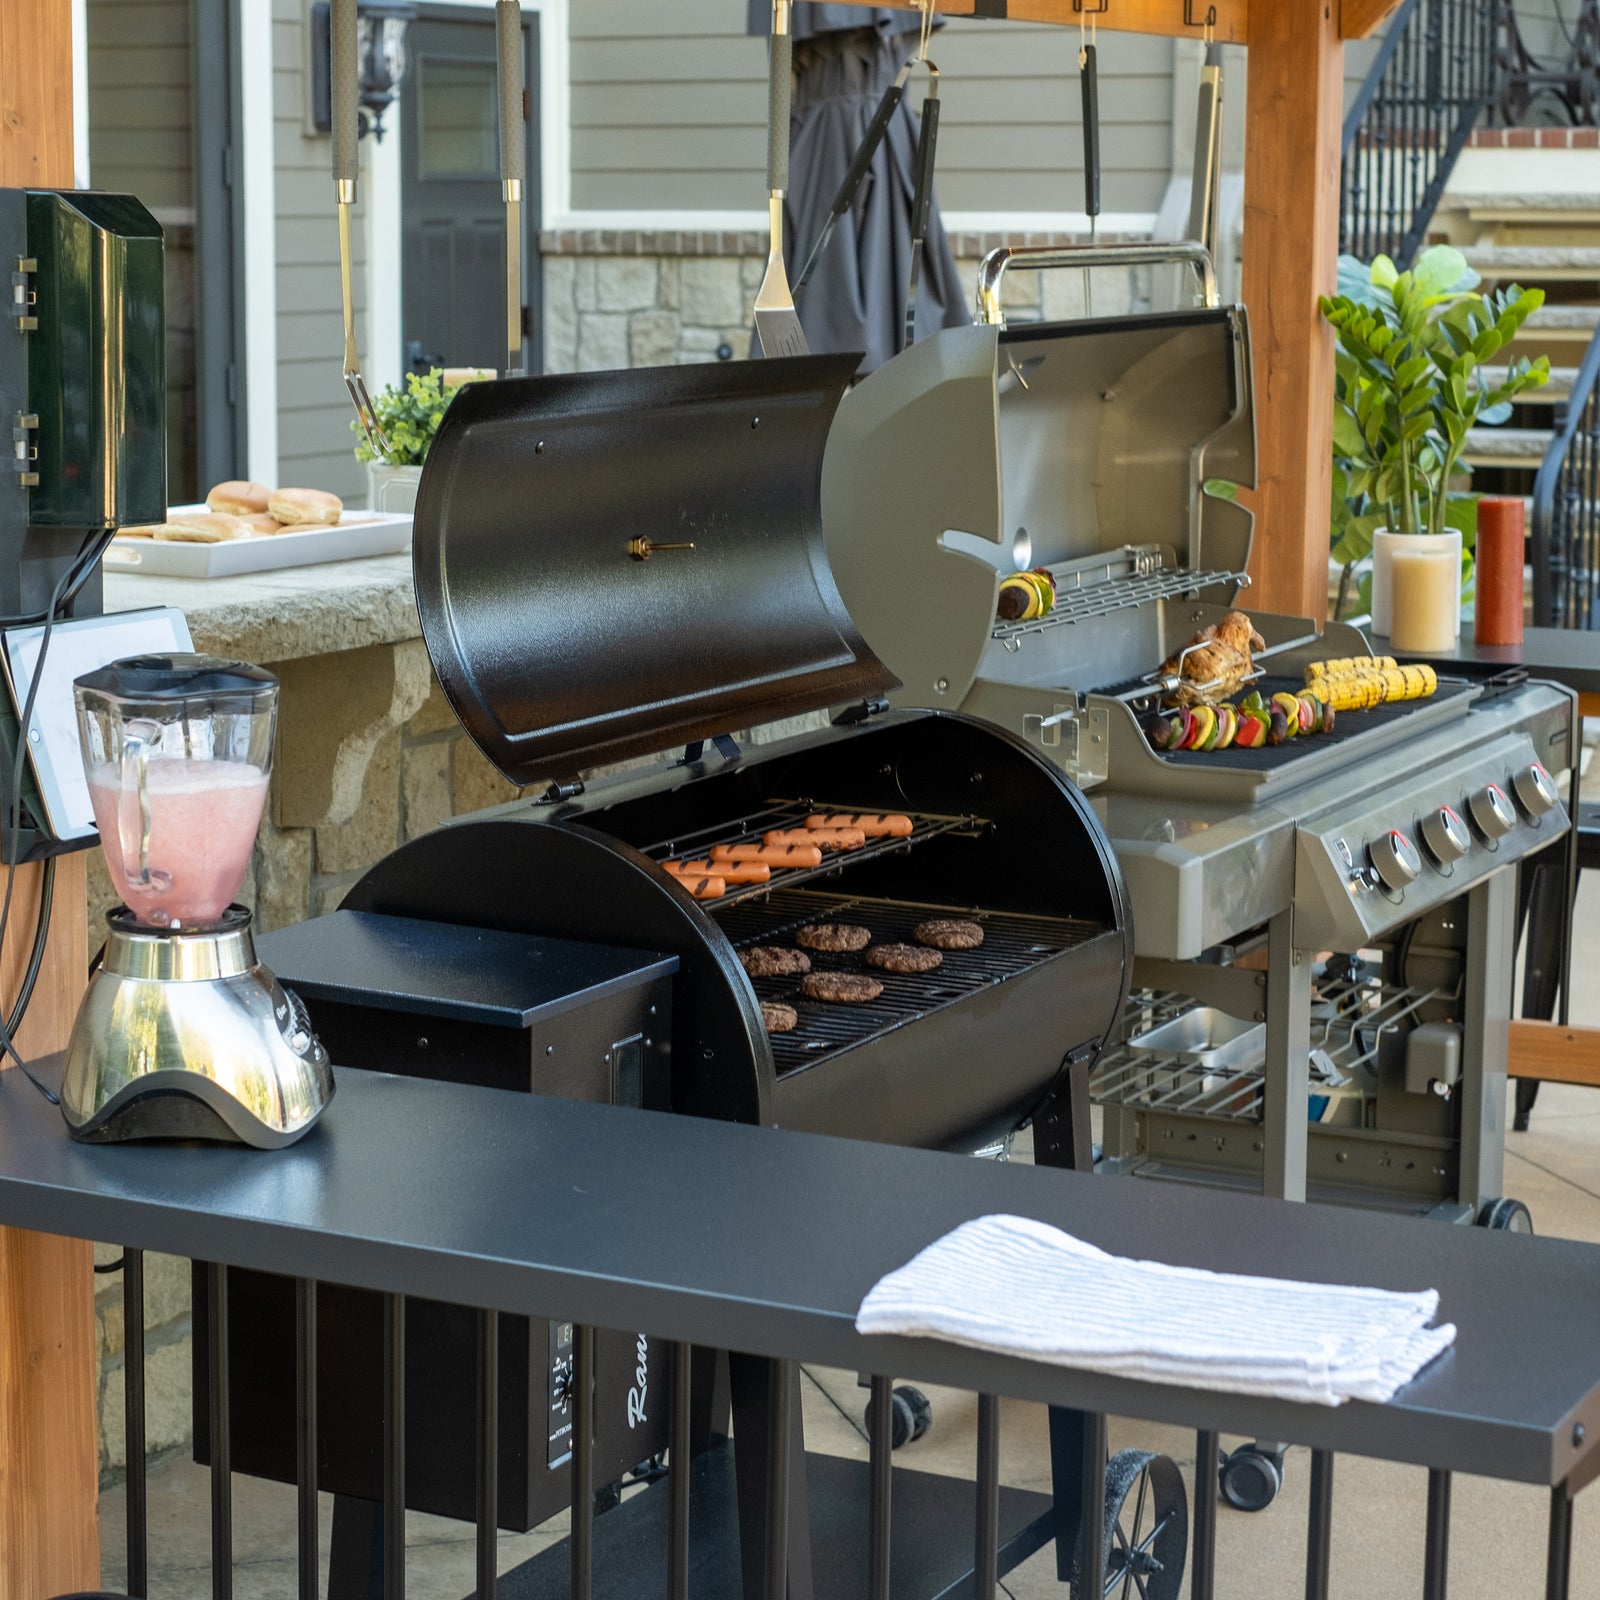 5 Winter Grilling Accessories For BBQing in Cold Weather